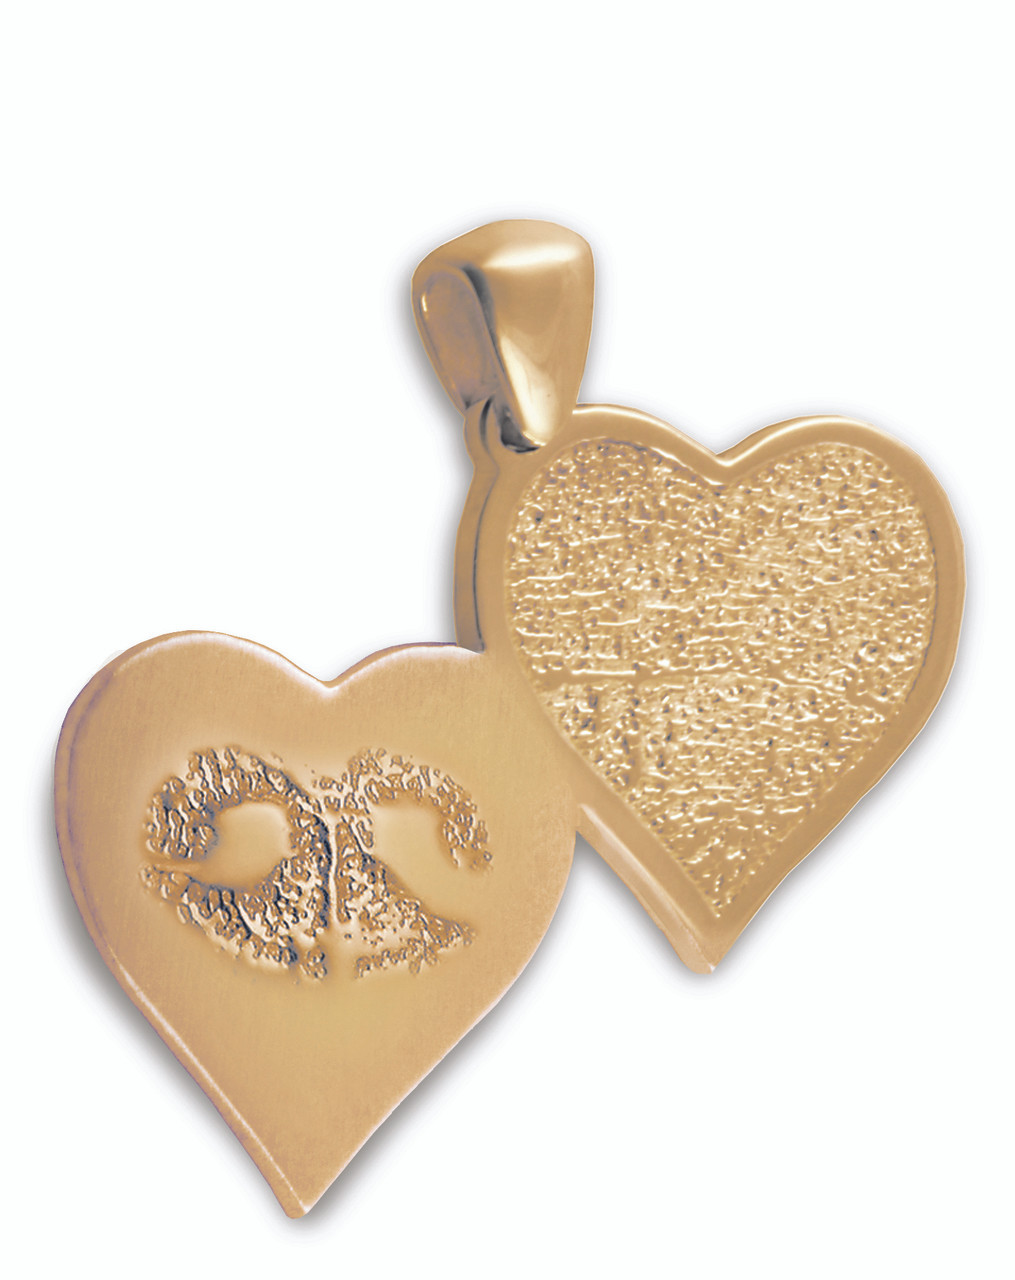 Double HeartFelt Charm in 14k Gold with Finger Print and Nose Print